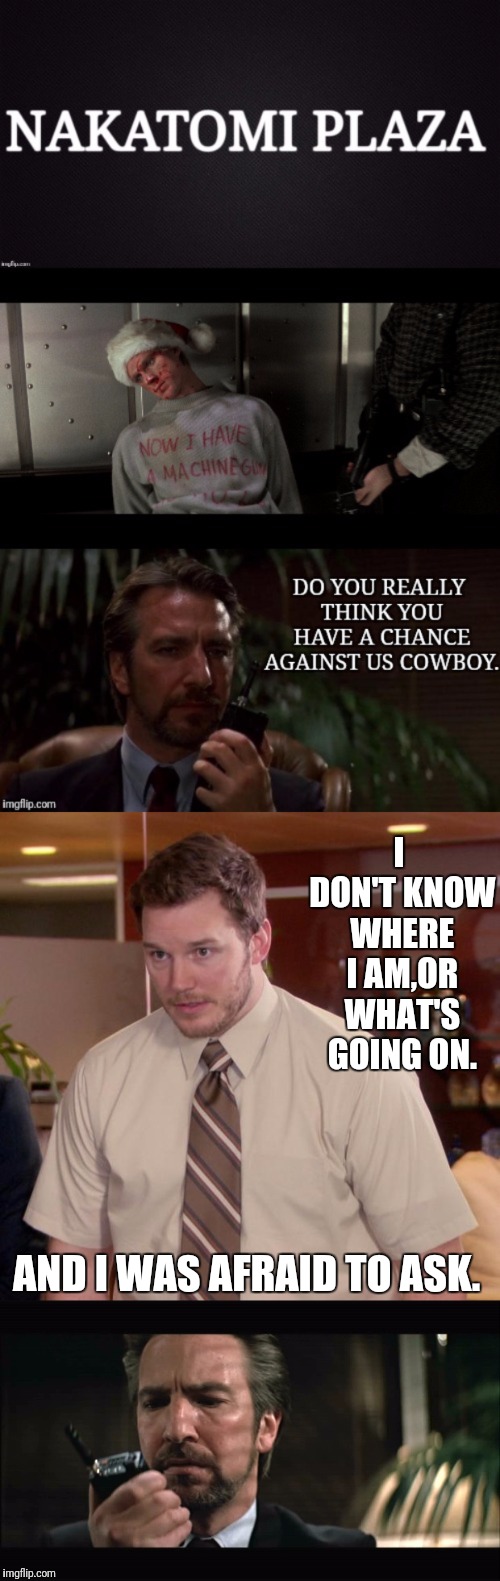 Ask Hans  | I DON'T KNOW WHERE I AM,OR WHAT'S GOING ON. AND I WAS AFRAID TO ASK. | image tagged in nakatomi plaza,die hard,chris pratt,alan rickman,parks and recreation | made w/ Imgflip meme maker